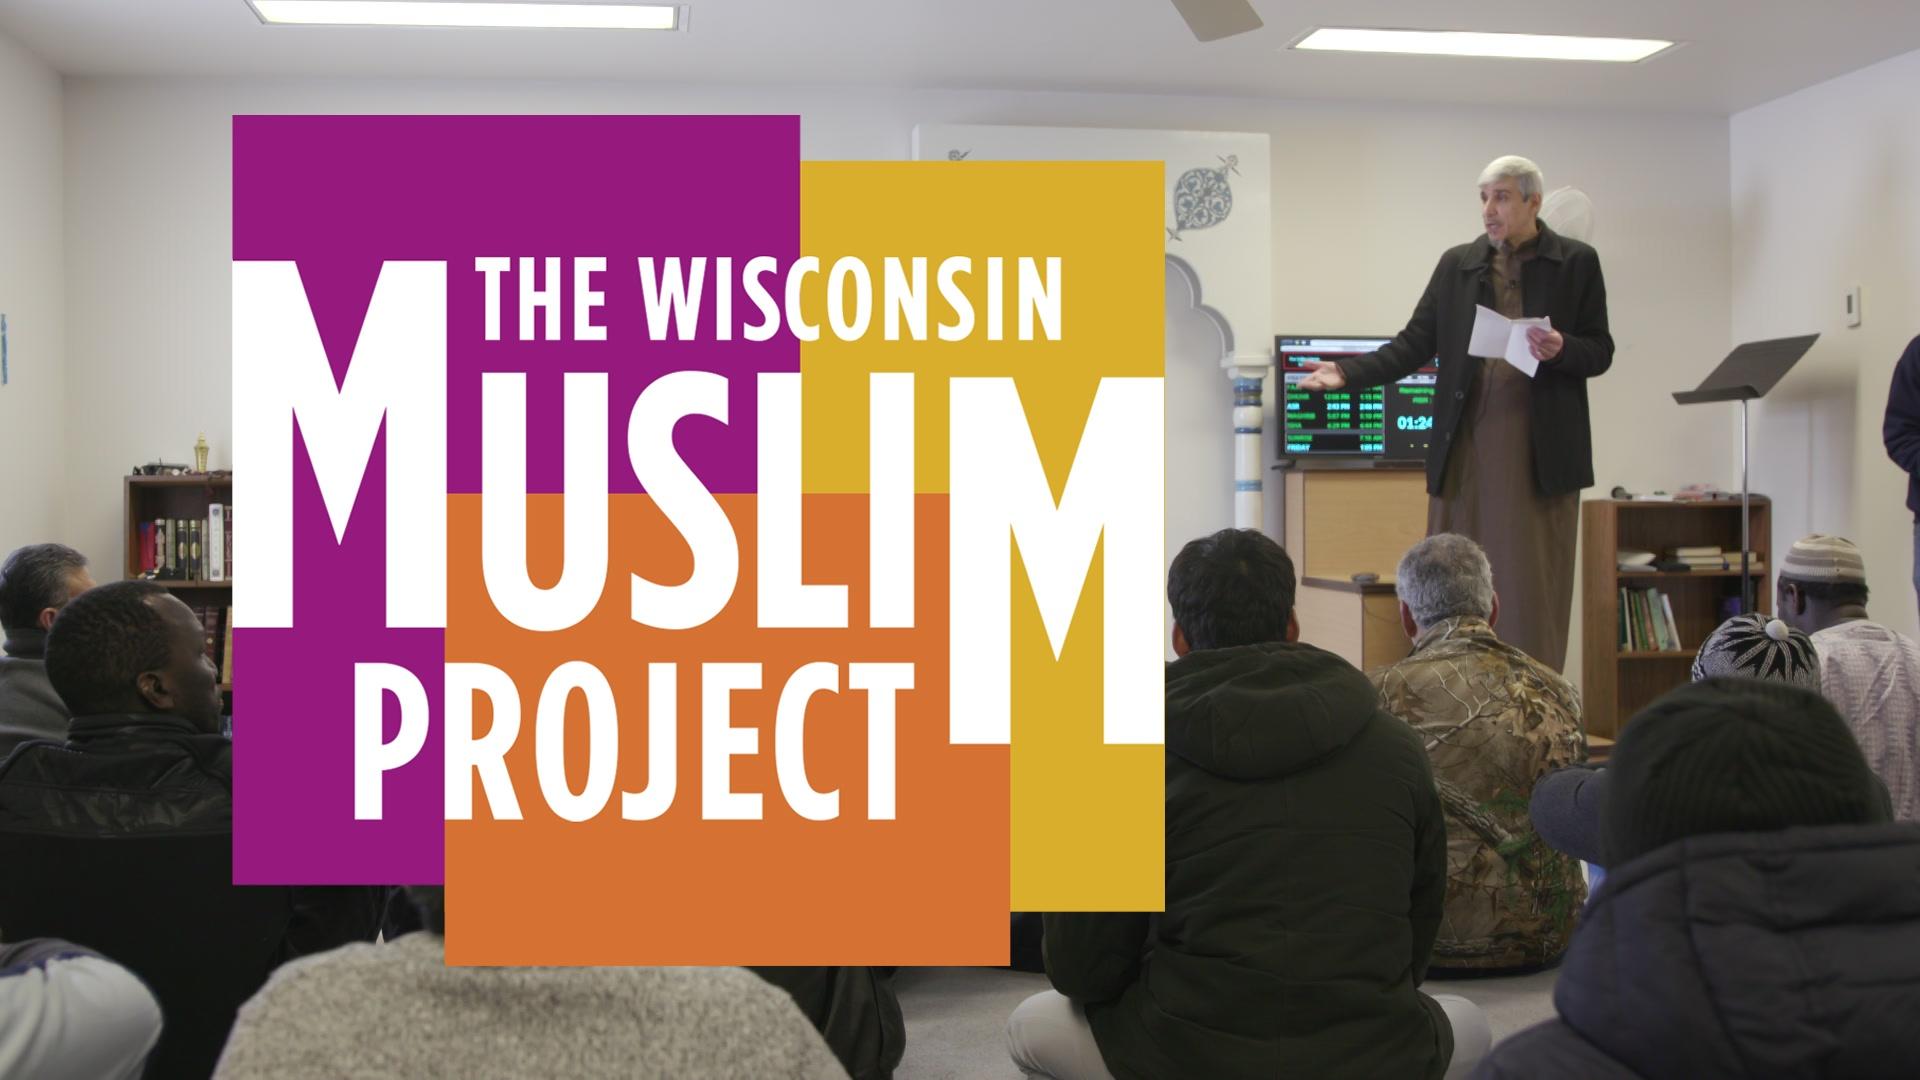 Gathering of individuals seated for "THE WISCONSIN MUSLIM PROJECT" presentation.